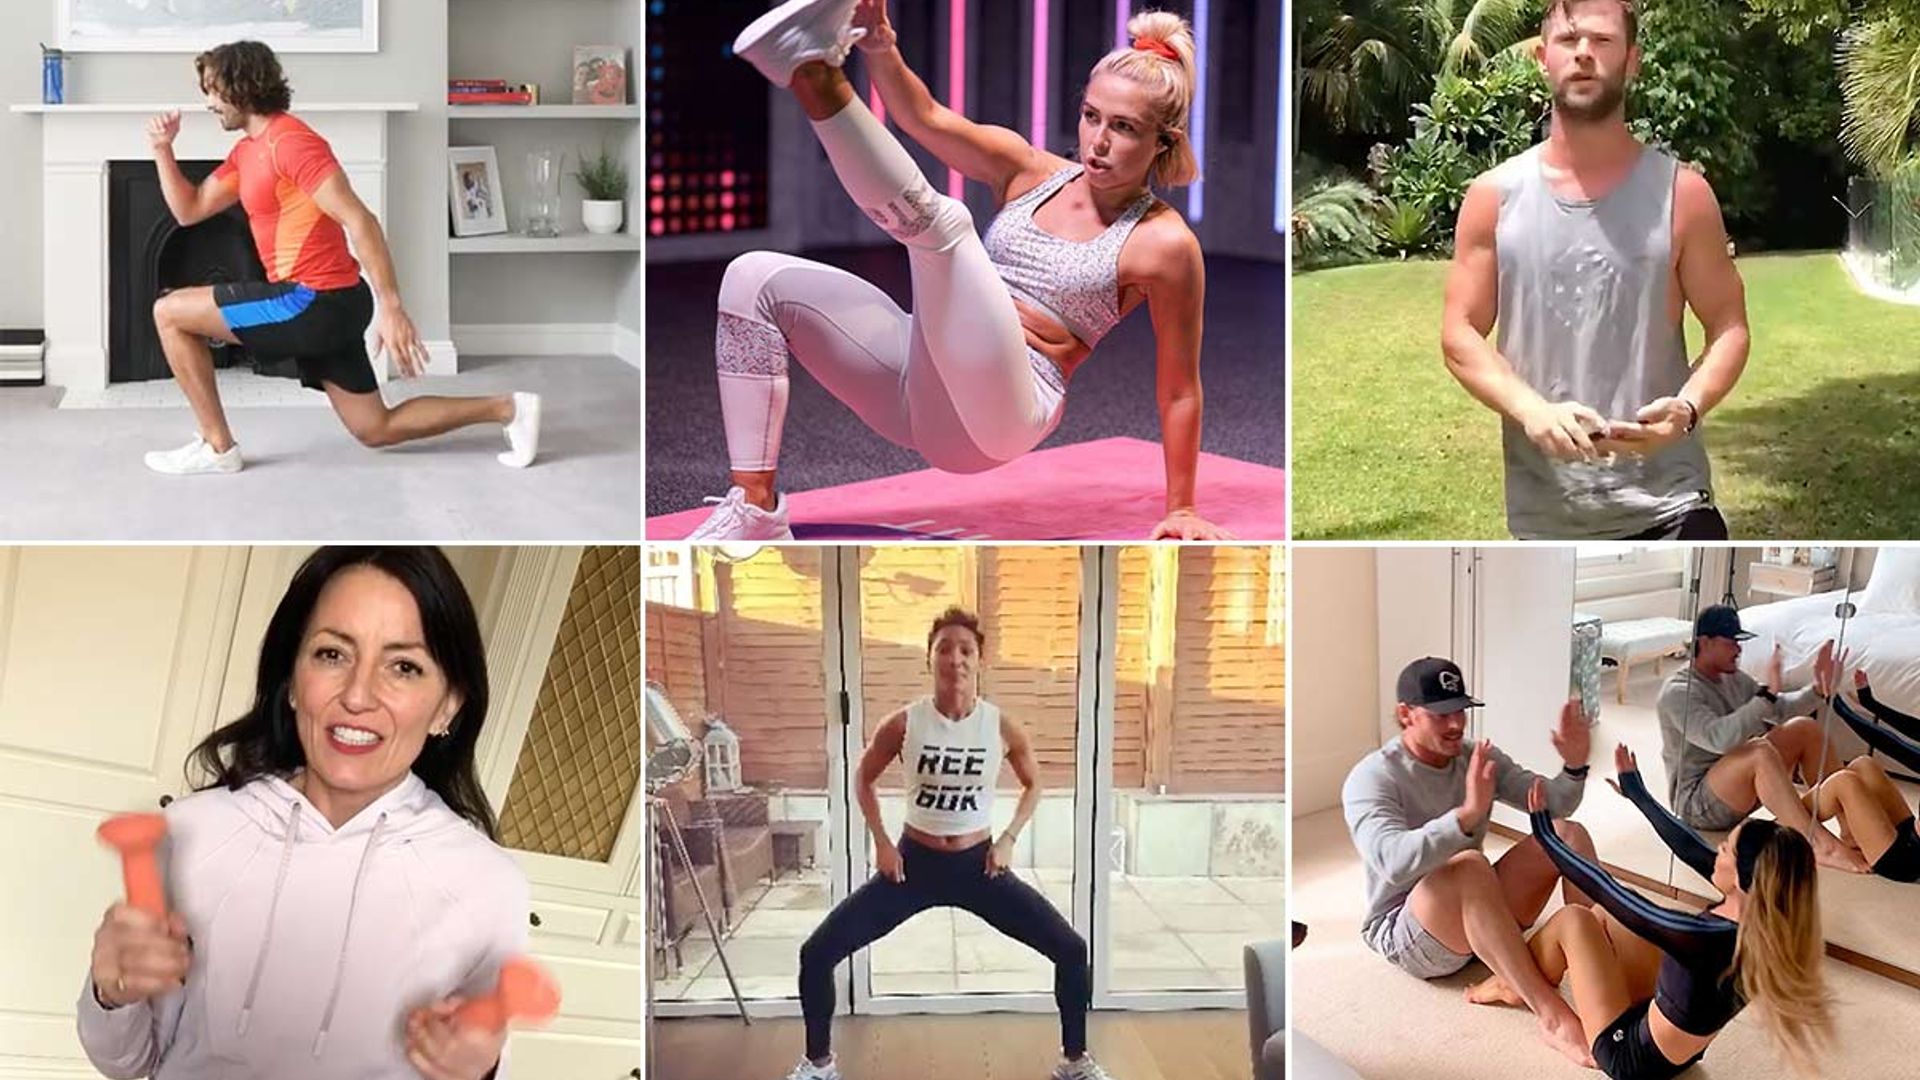 Celebrities doing free work-out sessions on Instagram so we can get fit while we self-isolate